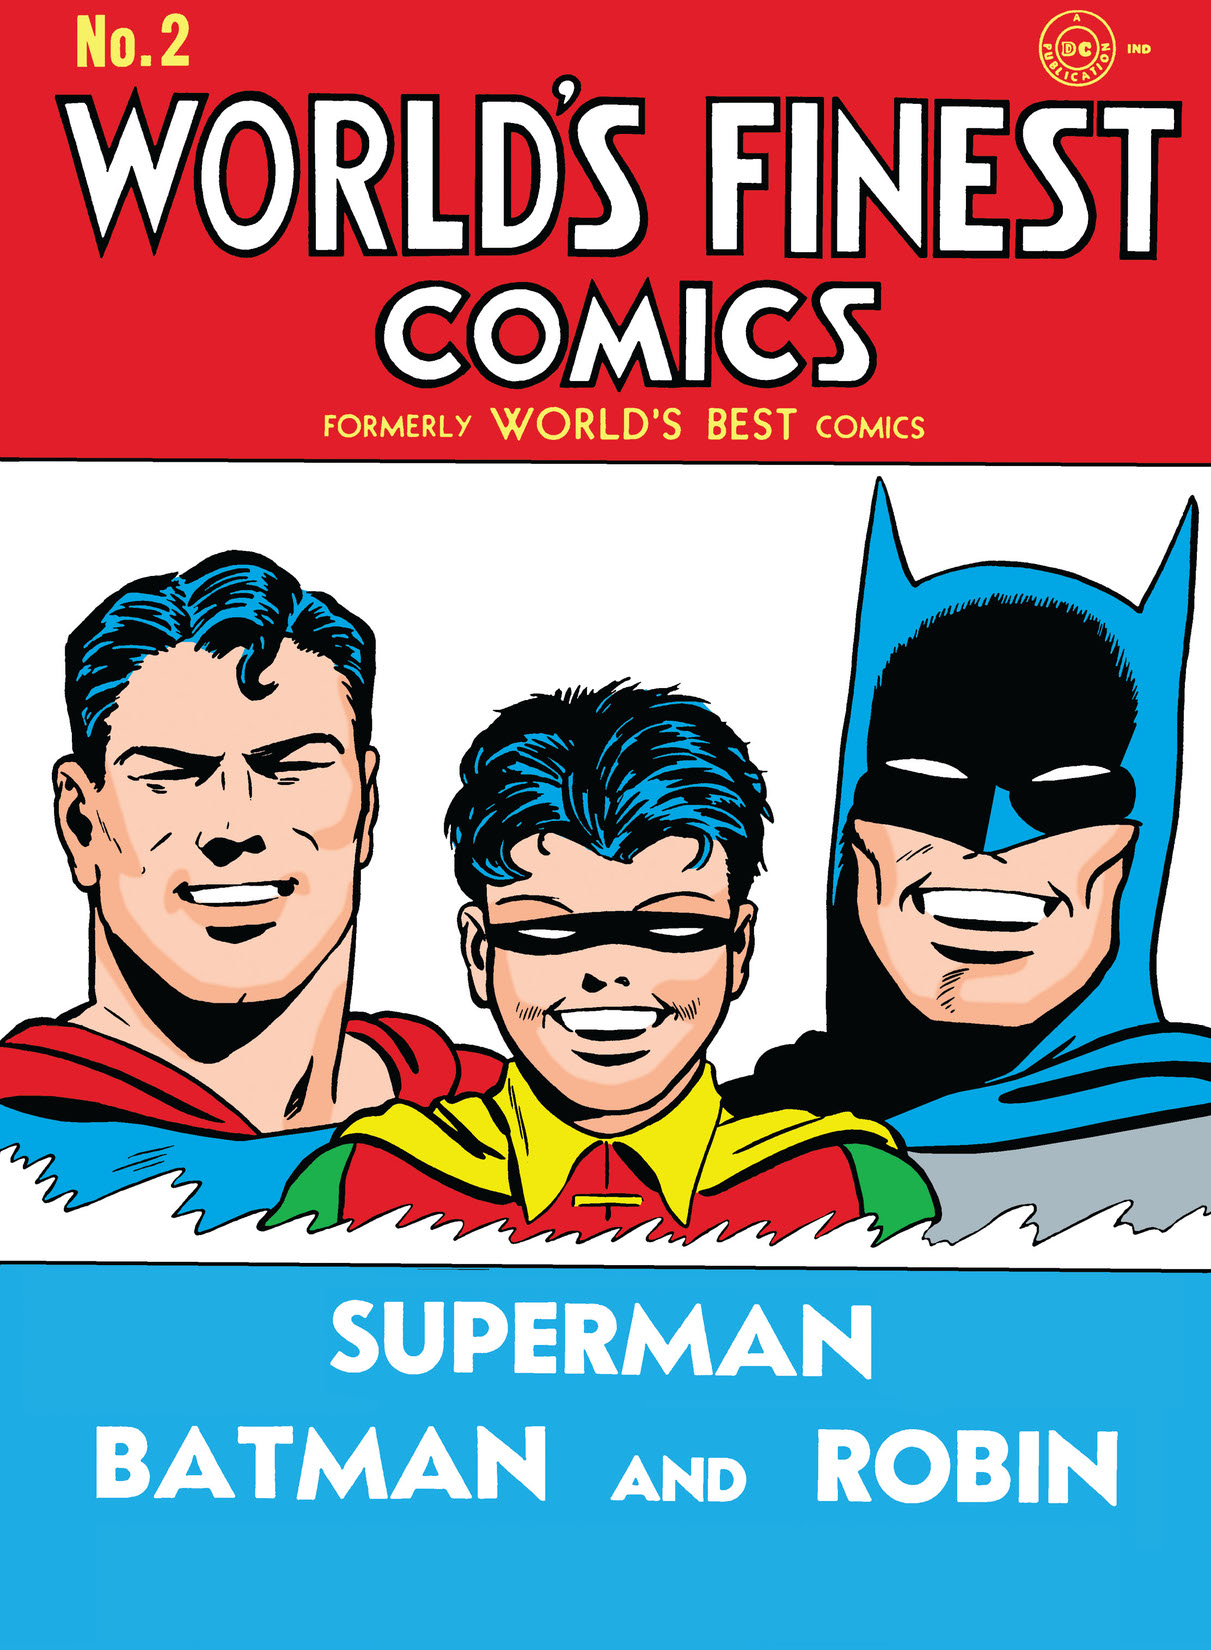 World's Finest Comics (1941-) #2 preview images